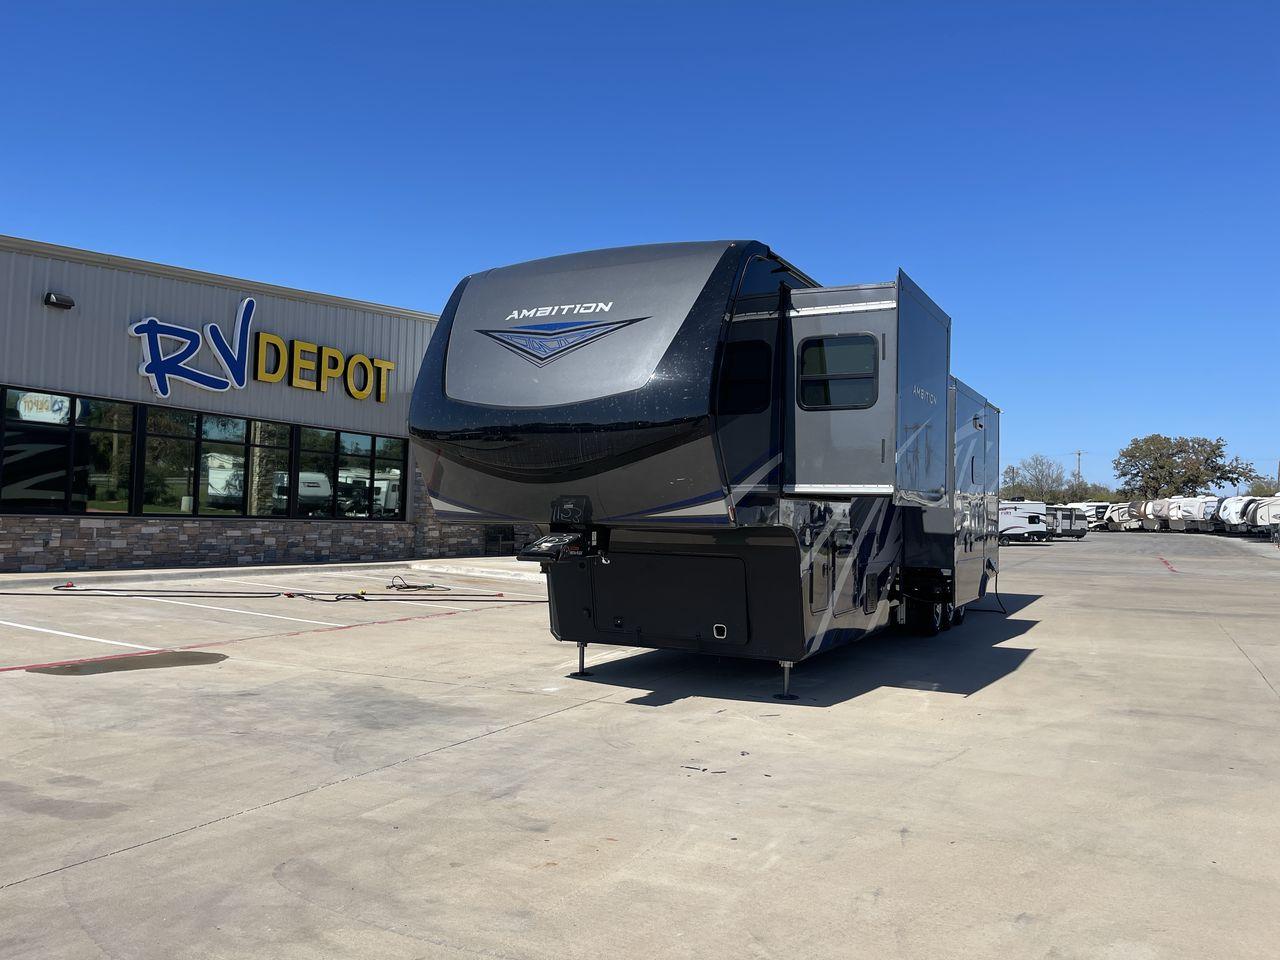 2022 VANLEIGH AMBITION 399TH (7HHAC4333NV) , Length: 43.58 ft. | Dry Weight: 16,900 lbs. | Gross Weight: 21,000 lbs. | Slides: 2 transmission, located at 4319 N Main St, Cleburne, TX, 76033, (817) 678-5133, 32.385960, -97.391212 - If you're in the market for a top-of-the-line Toy Hauler, look no further than RV Depot in Cleburne, TX. We are proud to present the VANLEIGH AMBITION 399TH, a luxurious and spacious RV that is sure to enhance your next adventure. With a price of $99,987, this 2022 model is a steal! Located in Cleb - Photo #0